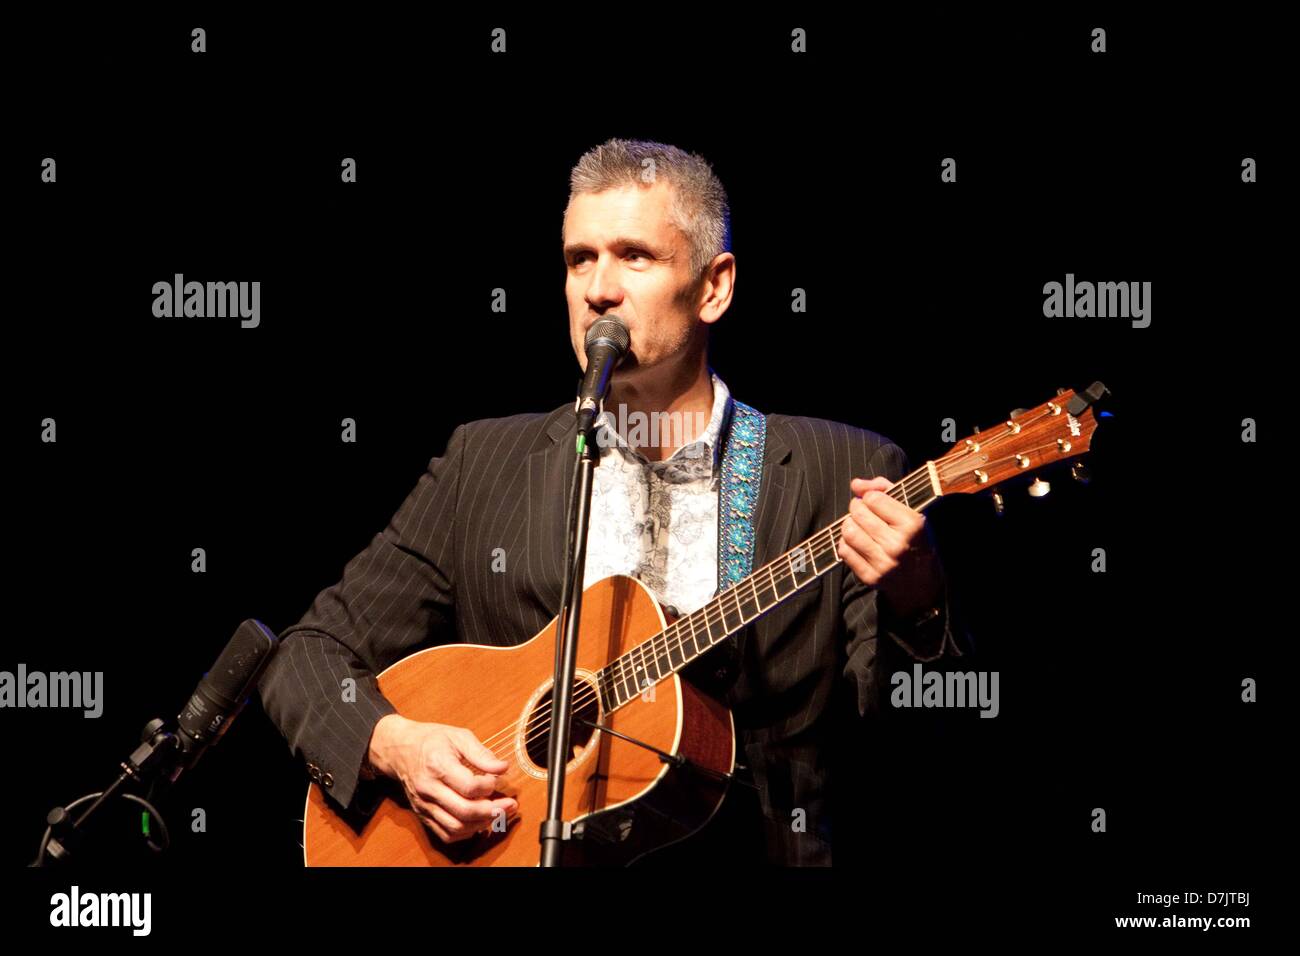 Guildford, Surrey, UK. 8th May 2013. Curtis Stigers performing on the first night of his 'Up Close and Personal' tour at GLive, Guildford. Credit:  Andrew Spiers / Alamy Live News Stock Photo